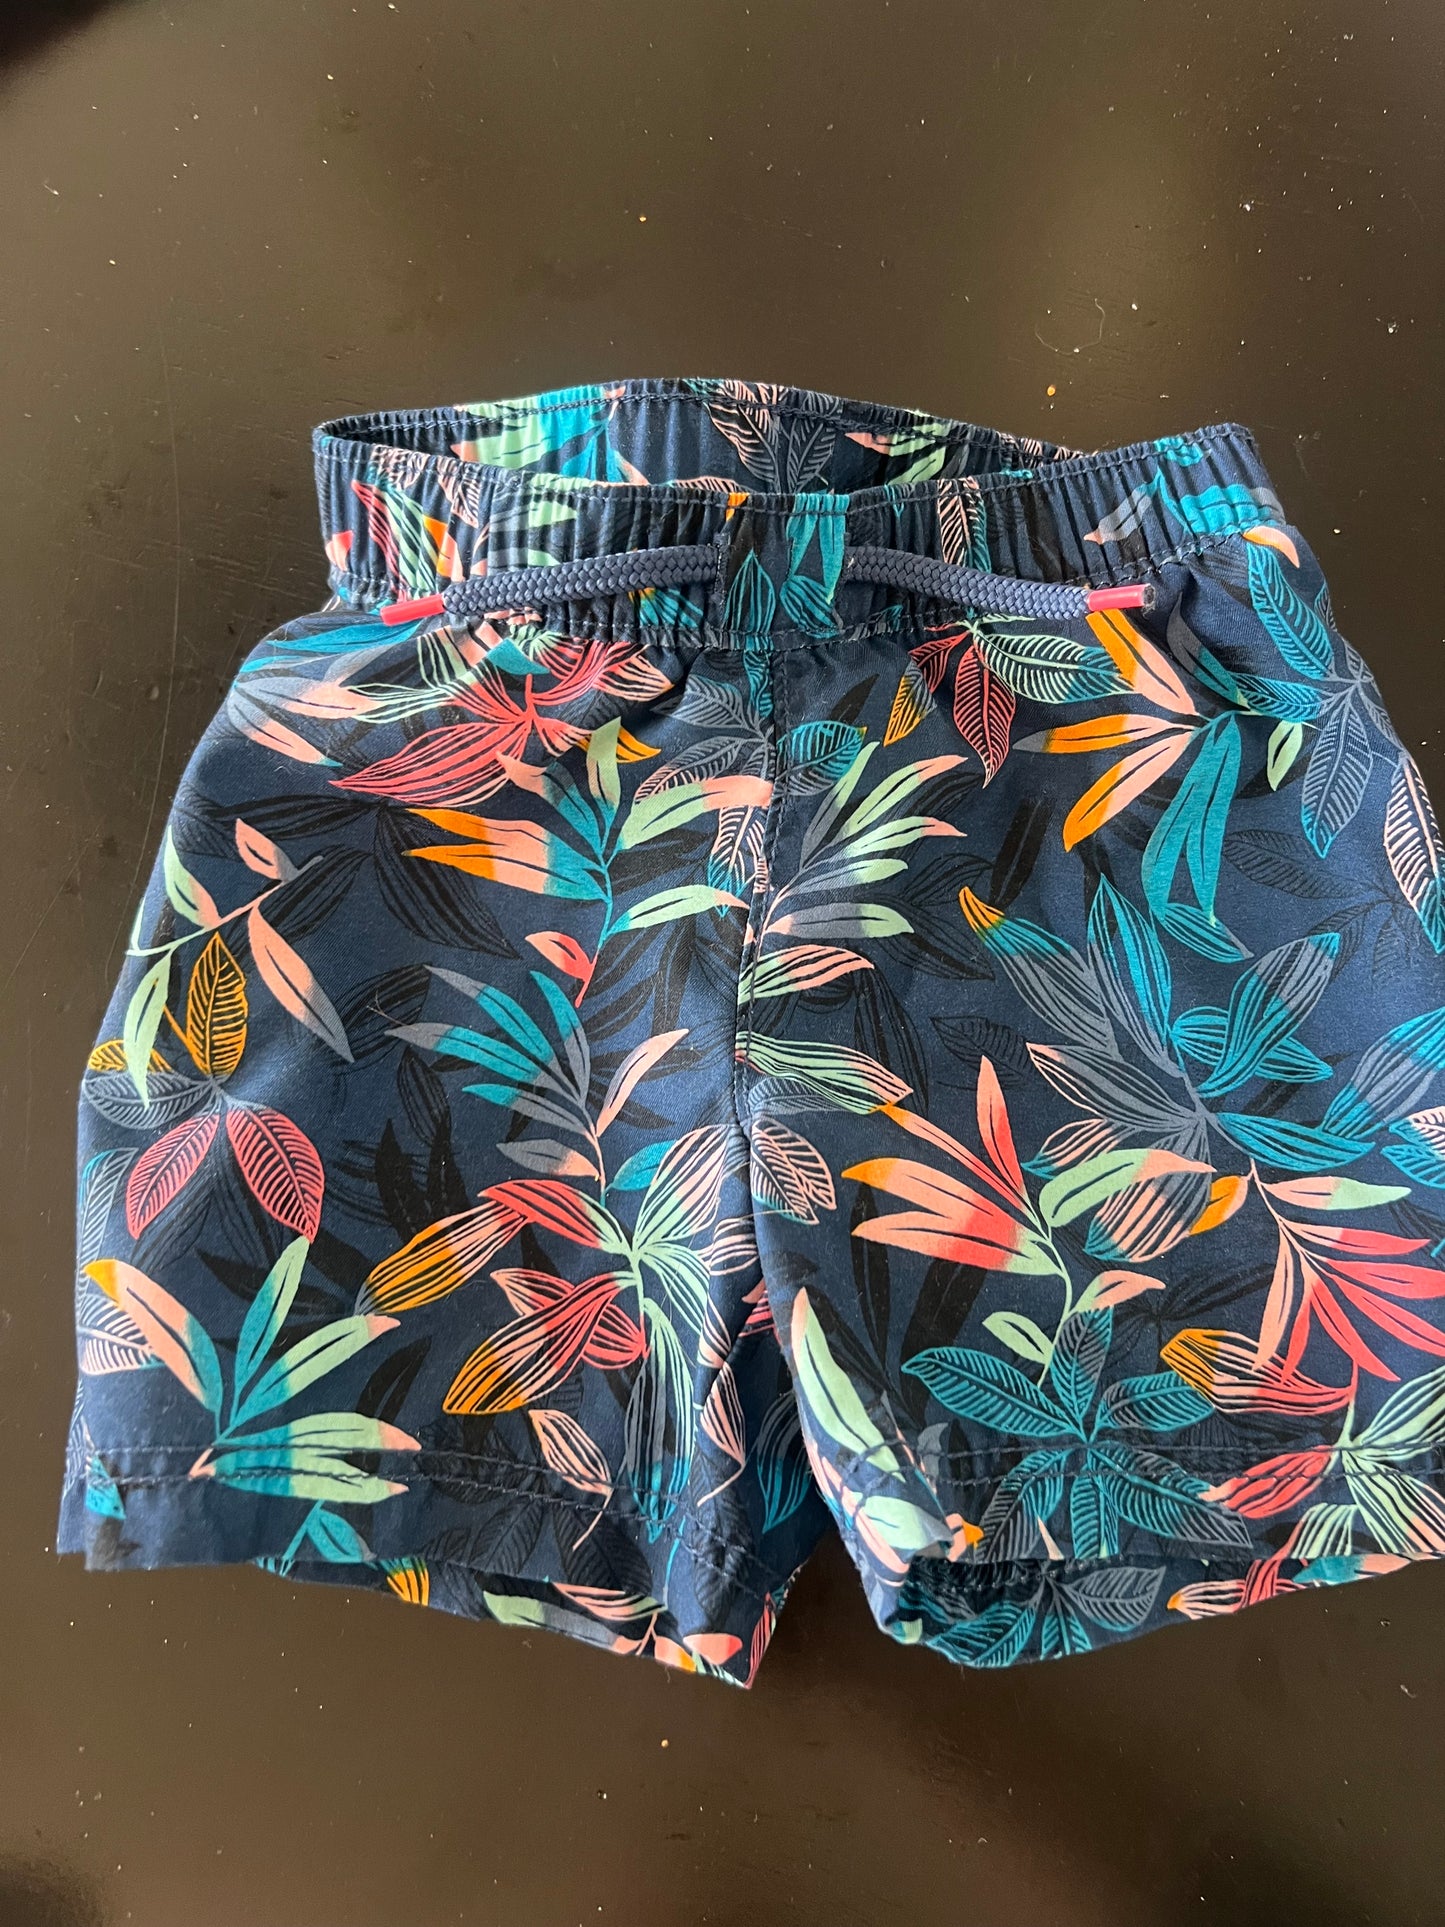 12-18 mo old navy unlined board shorts